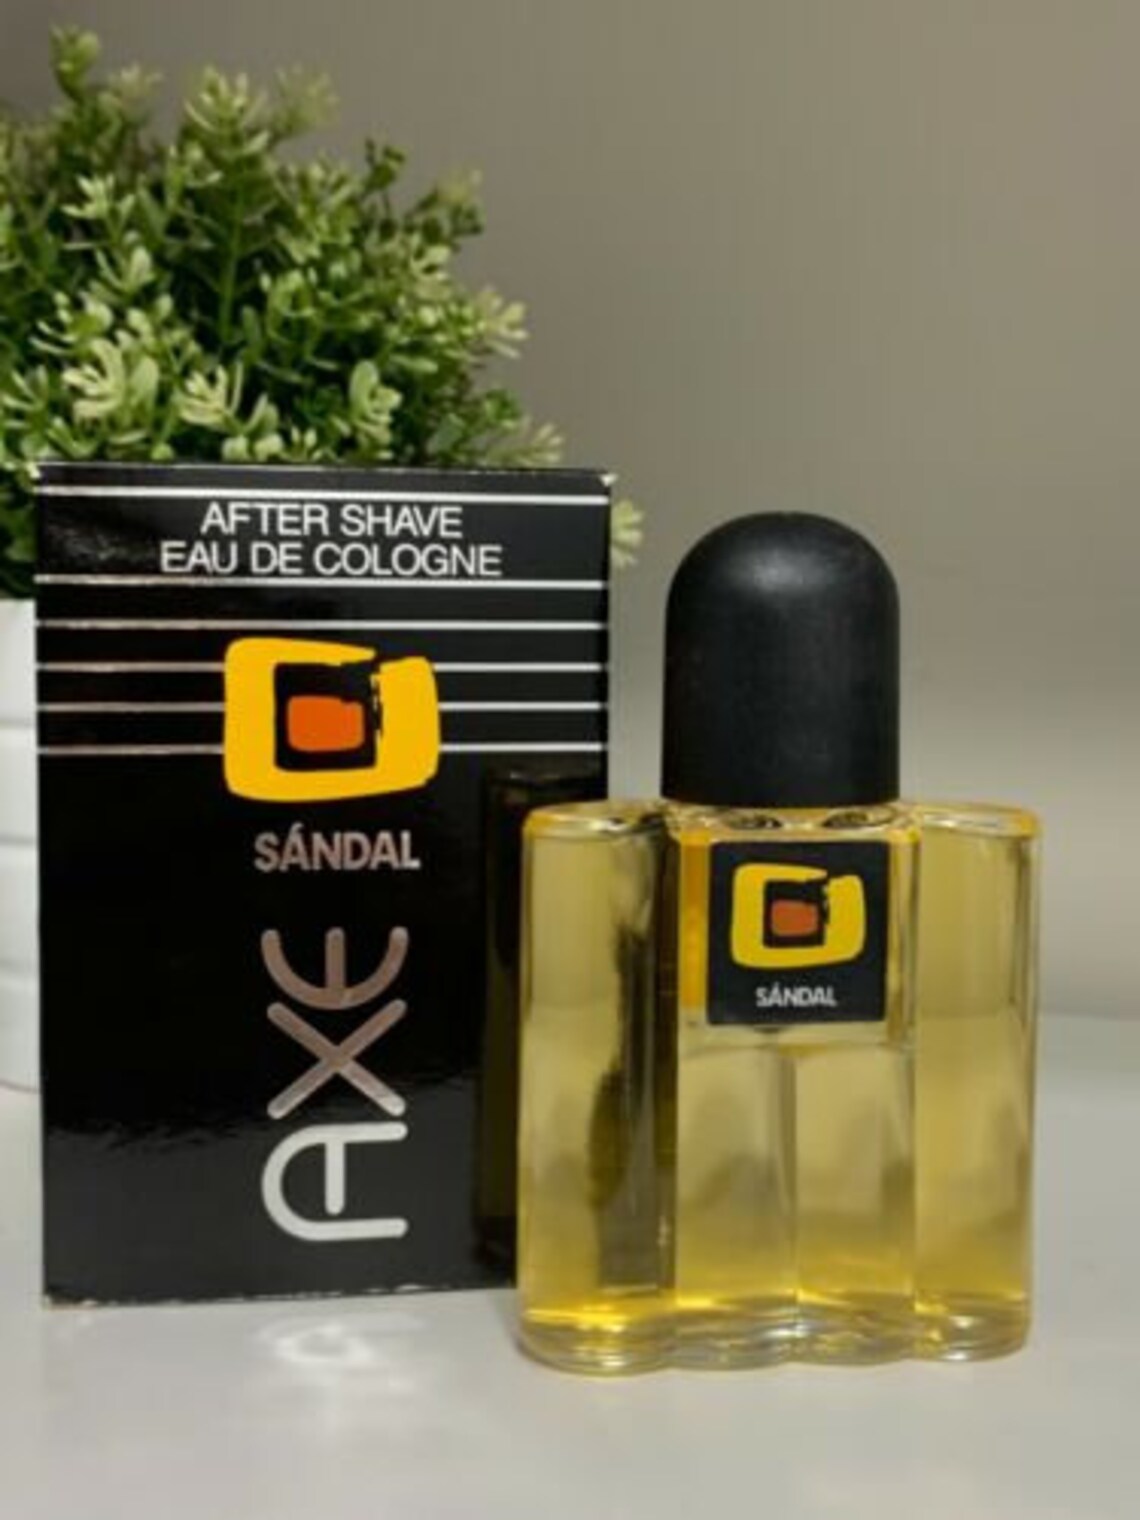 Ax SANDAL ELIDA GIBBS After shave Eau de Cologne new in box unused Rare